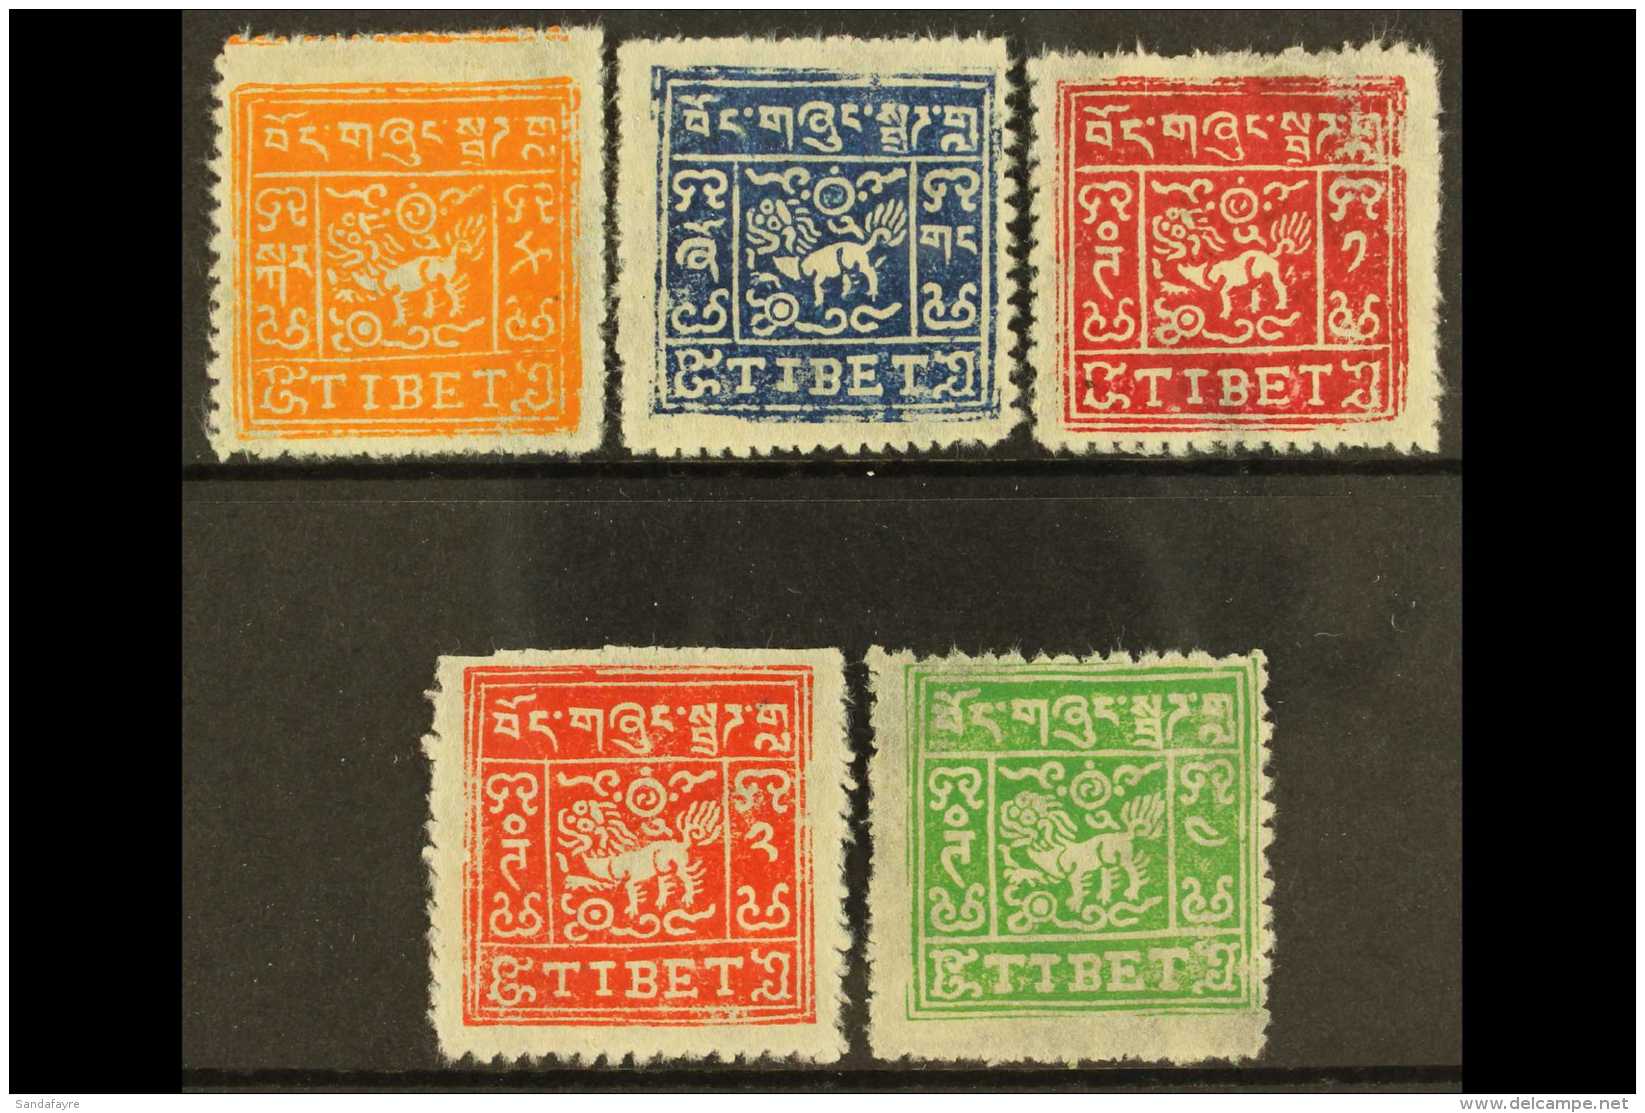 1933 Third Series Pin Perf, Set Complete, SG 9A-13A, Very Fine Mint No Gum, As Issued. (5 Stamps) For More Images,... - Tibet